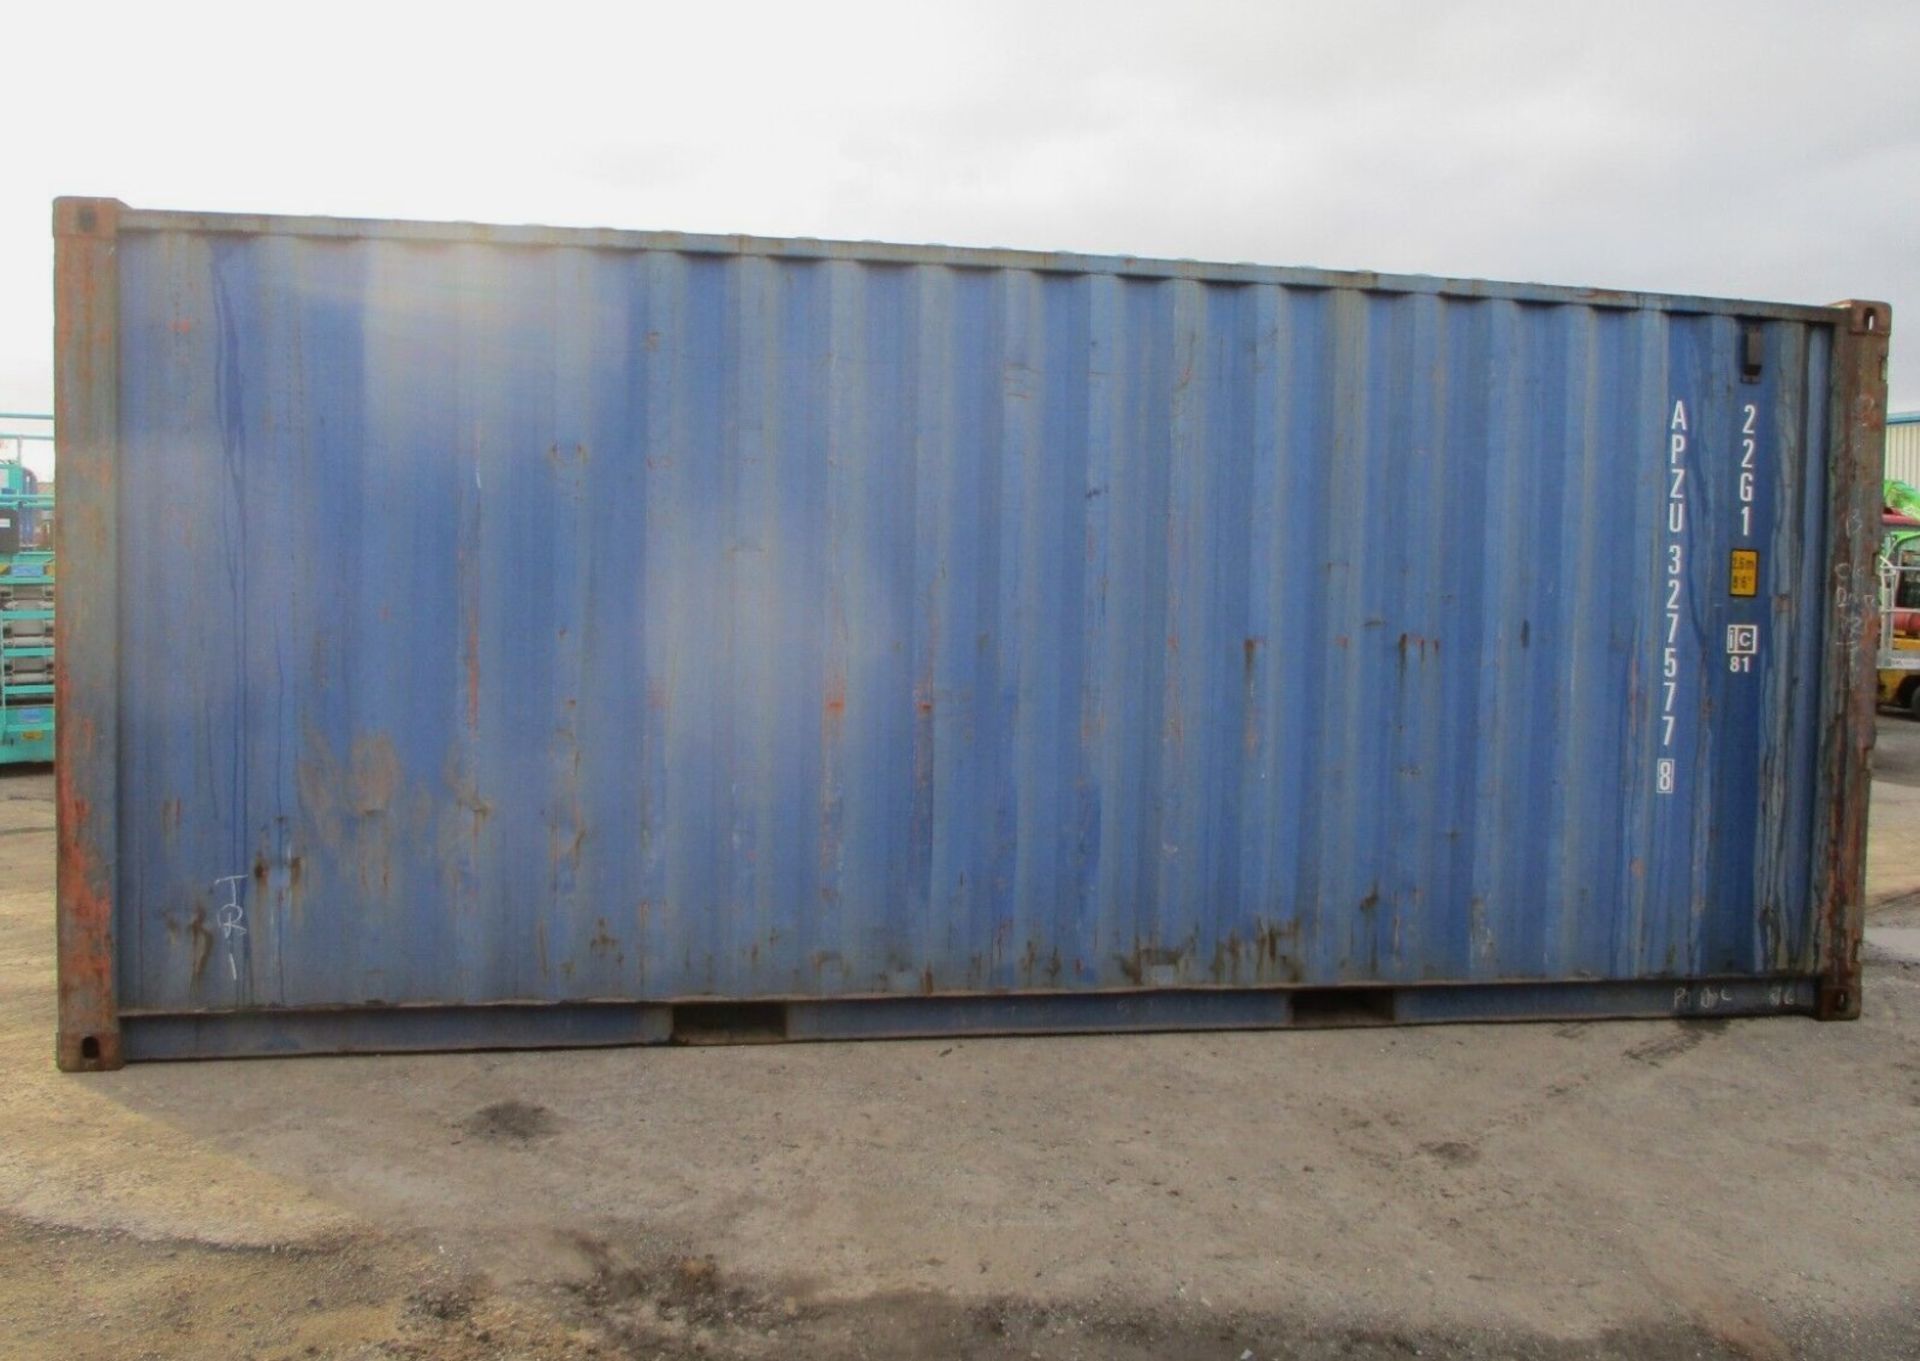 20 FEET LONG X 8 FEET WIDE SHIPPING CONTAINER: VERSATILE STORAGE SOLUTION